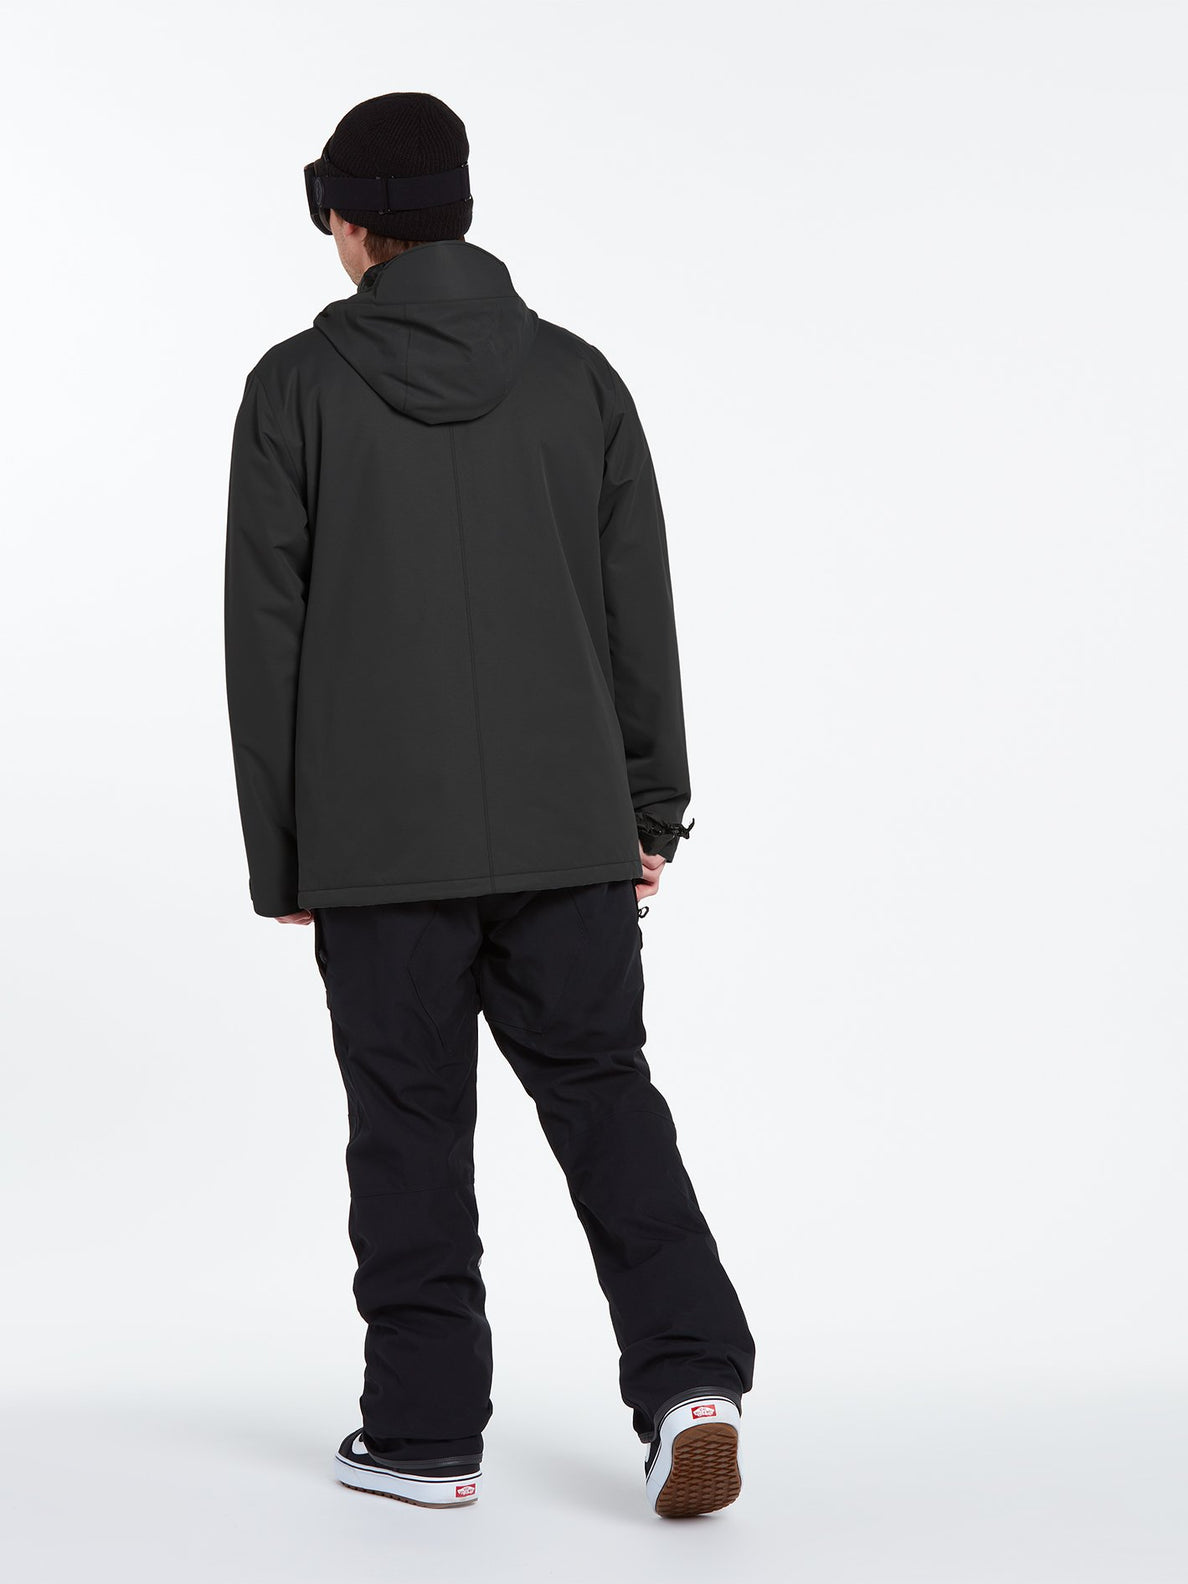 17Forty Insulated Jacket - BLACK (G0452114_BLK) [53]